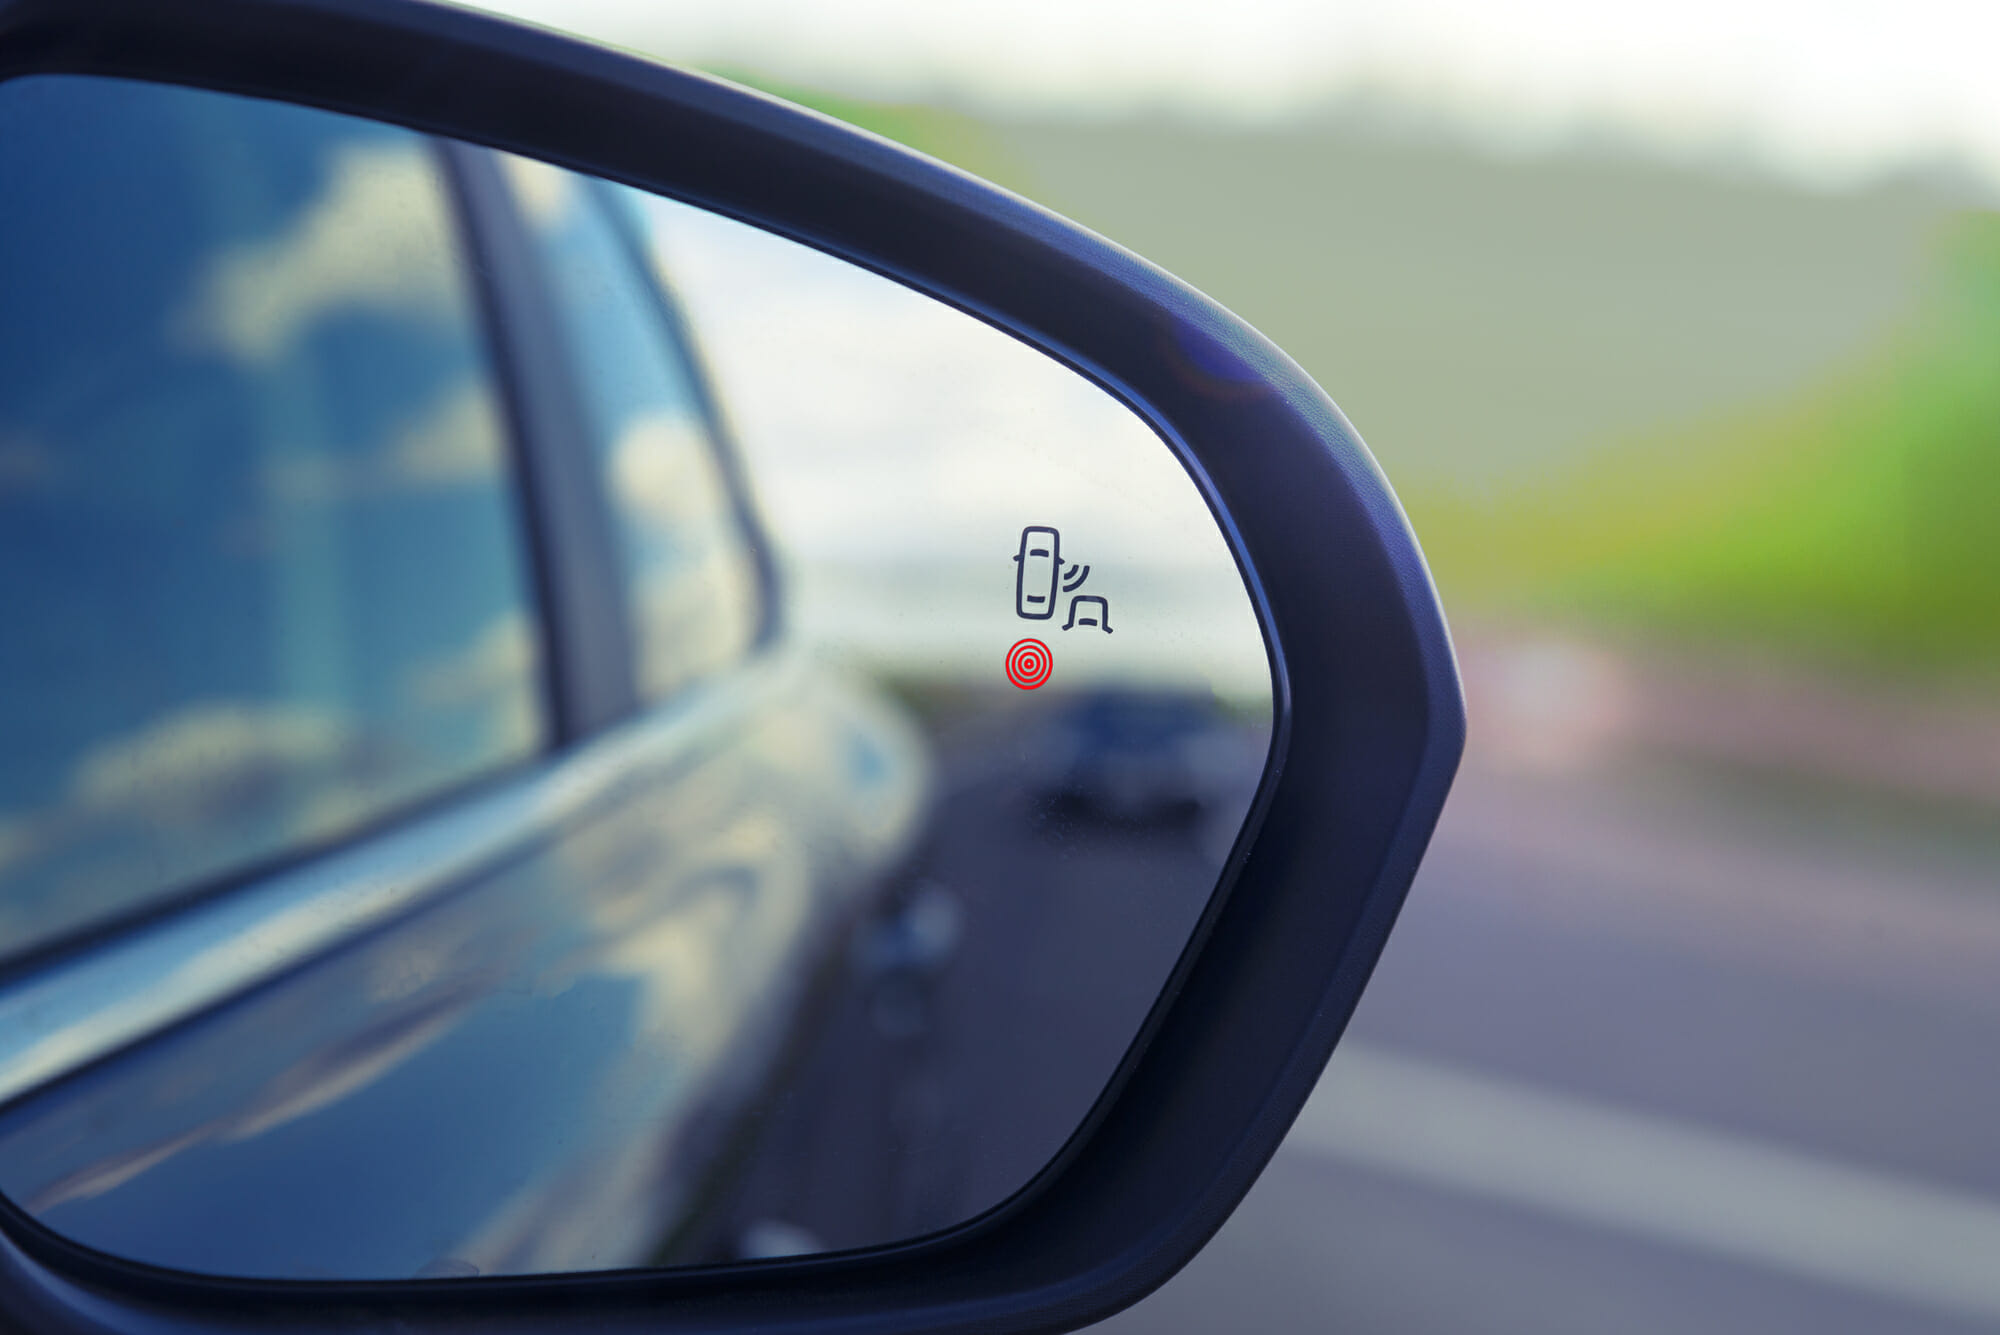 Blind Spot Monitoring System adds vision to the Hyundai safety rating